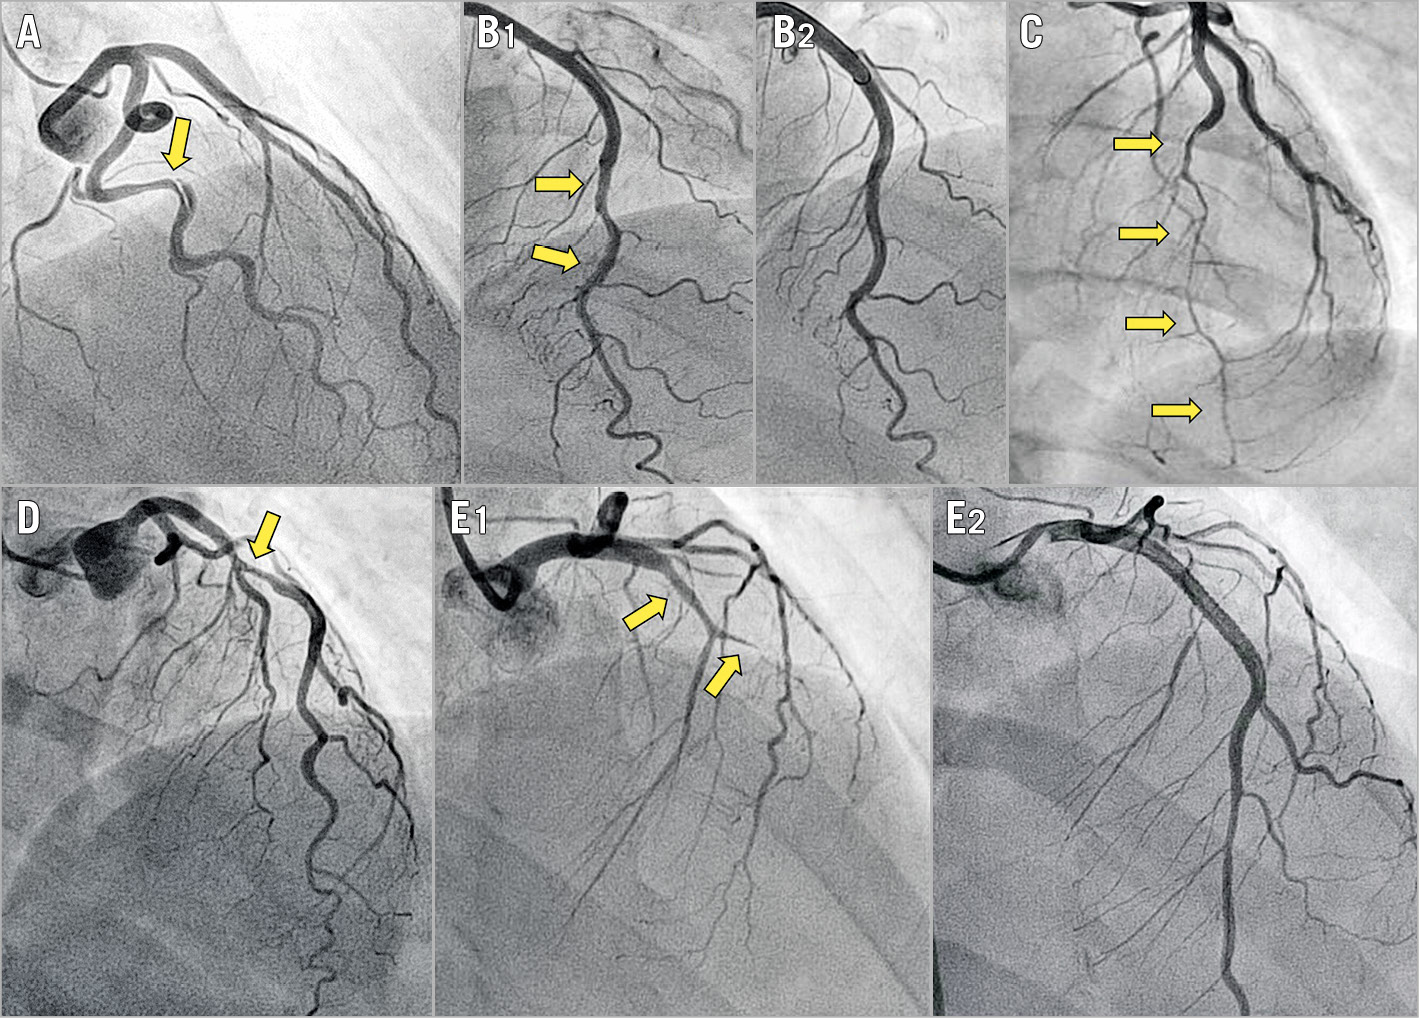 Figure 1. Angiographic classification of SCAD. Arrows indicate the dissected segments. A) Angiotype 1, radiolucent flap or dual lumen. B1) Angiotype 2A, long (>20 mm) narrowing with distal calibre recovery. B2) Vessel restoration three months after conservative management of B1. C) Angiotype 2B, long (>20 mm) narrowing involving the main distal vessel. D) Angiotype 3, focal (<20 mm), sometimes tubular stenosis. E1) Angiotype 4, total occlusion of the main vessel. E2) Flow restoration after stenting.